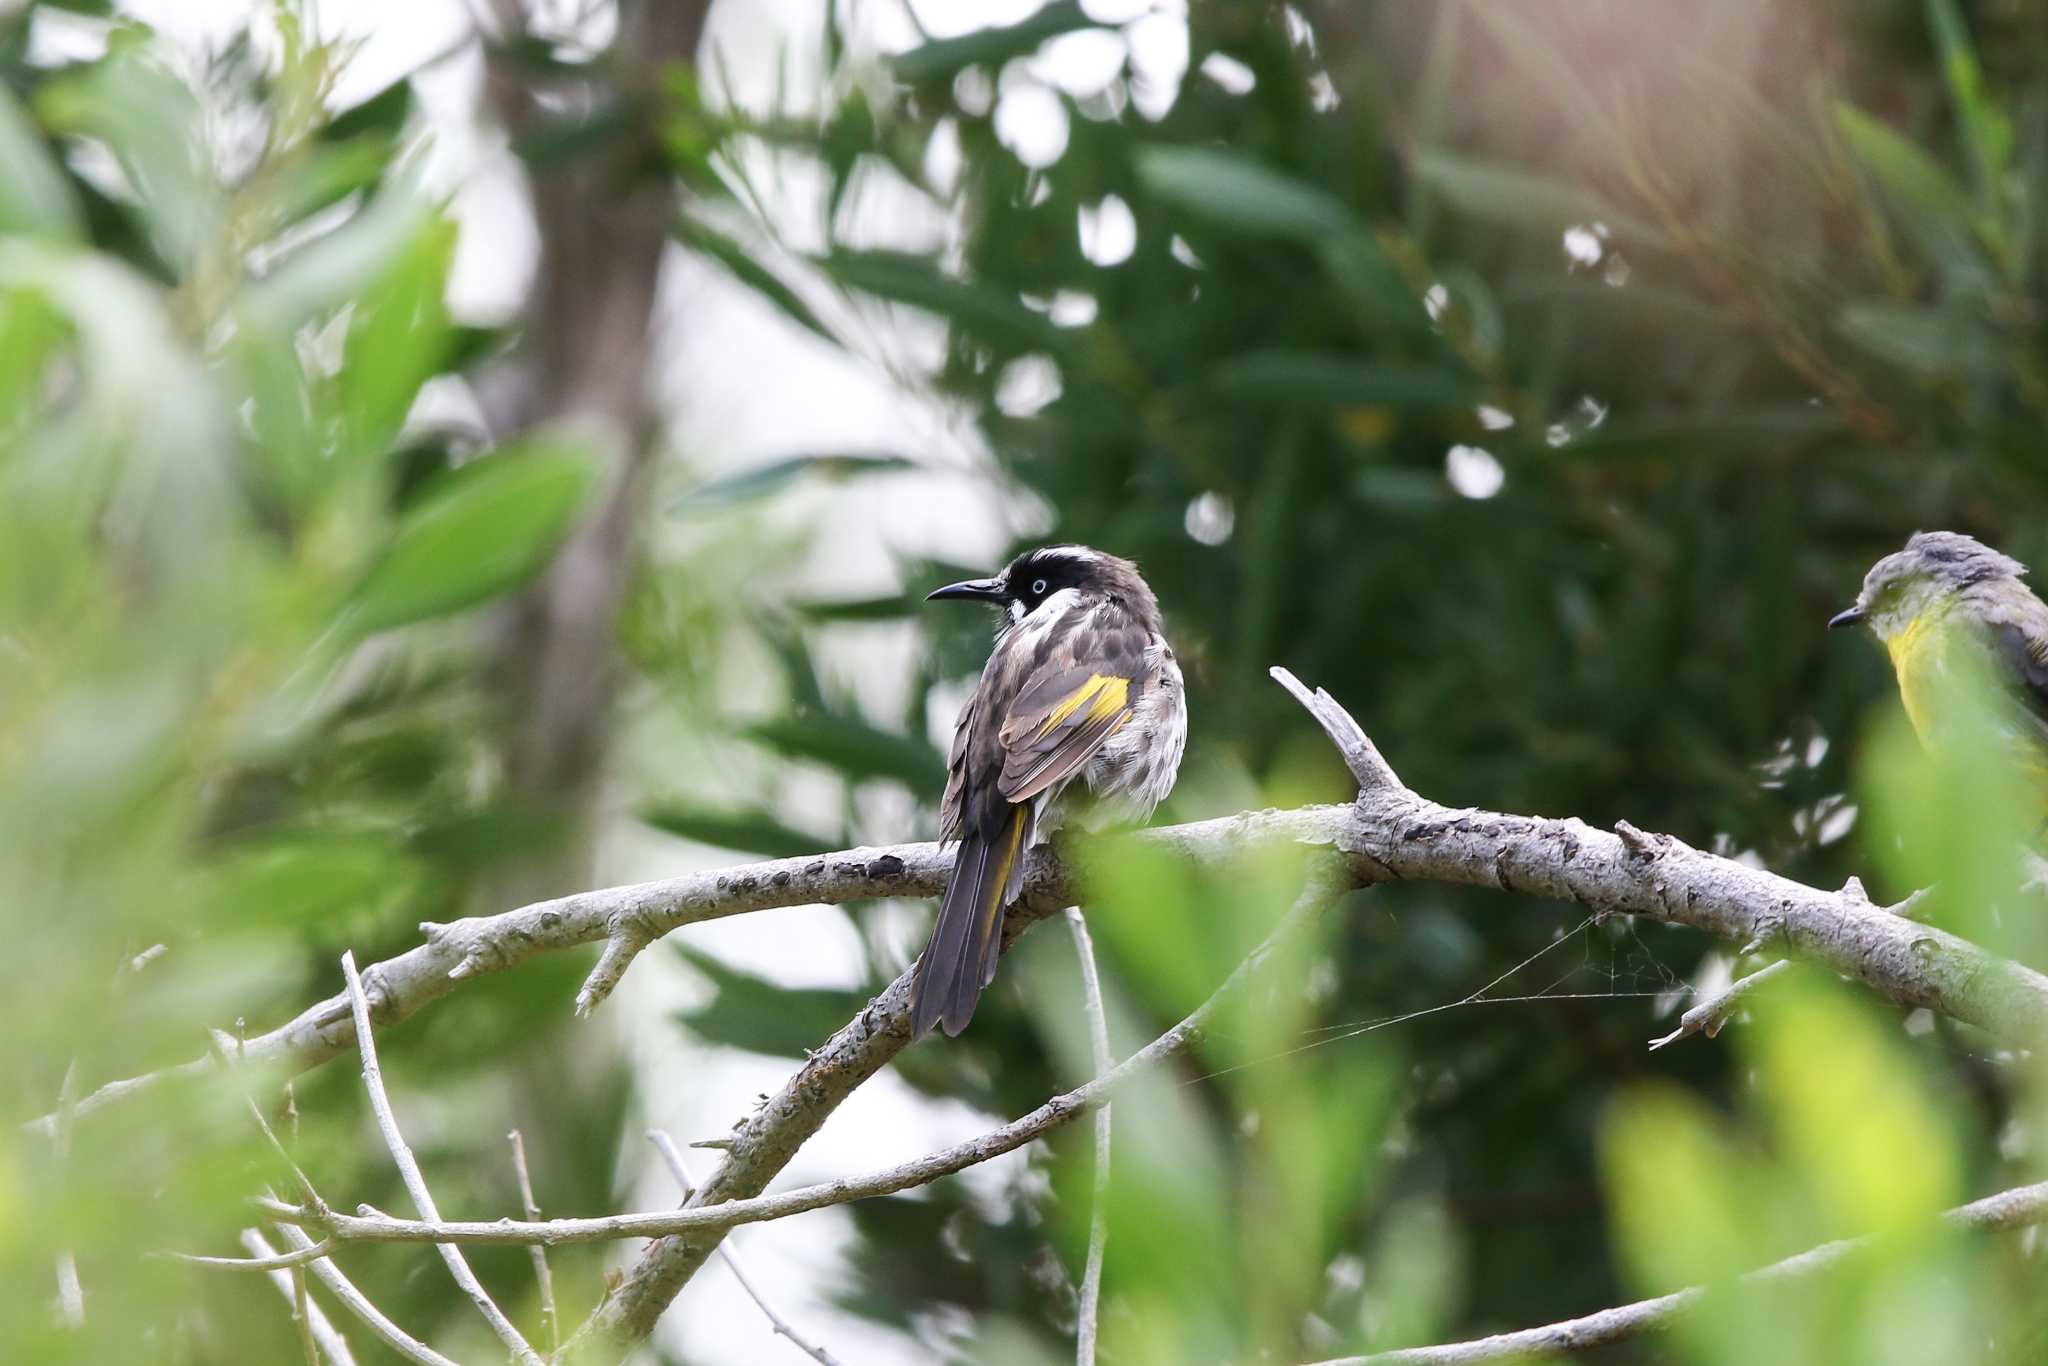 Photo of New Holland Honeyeater at Aire River Wildlife Reserve by Trio